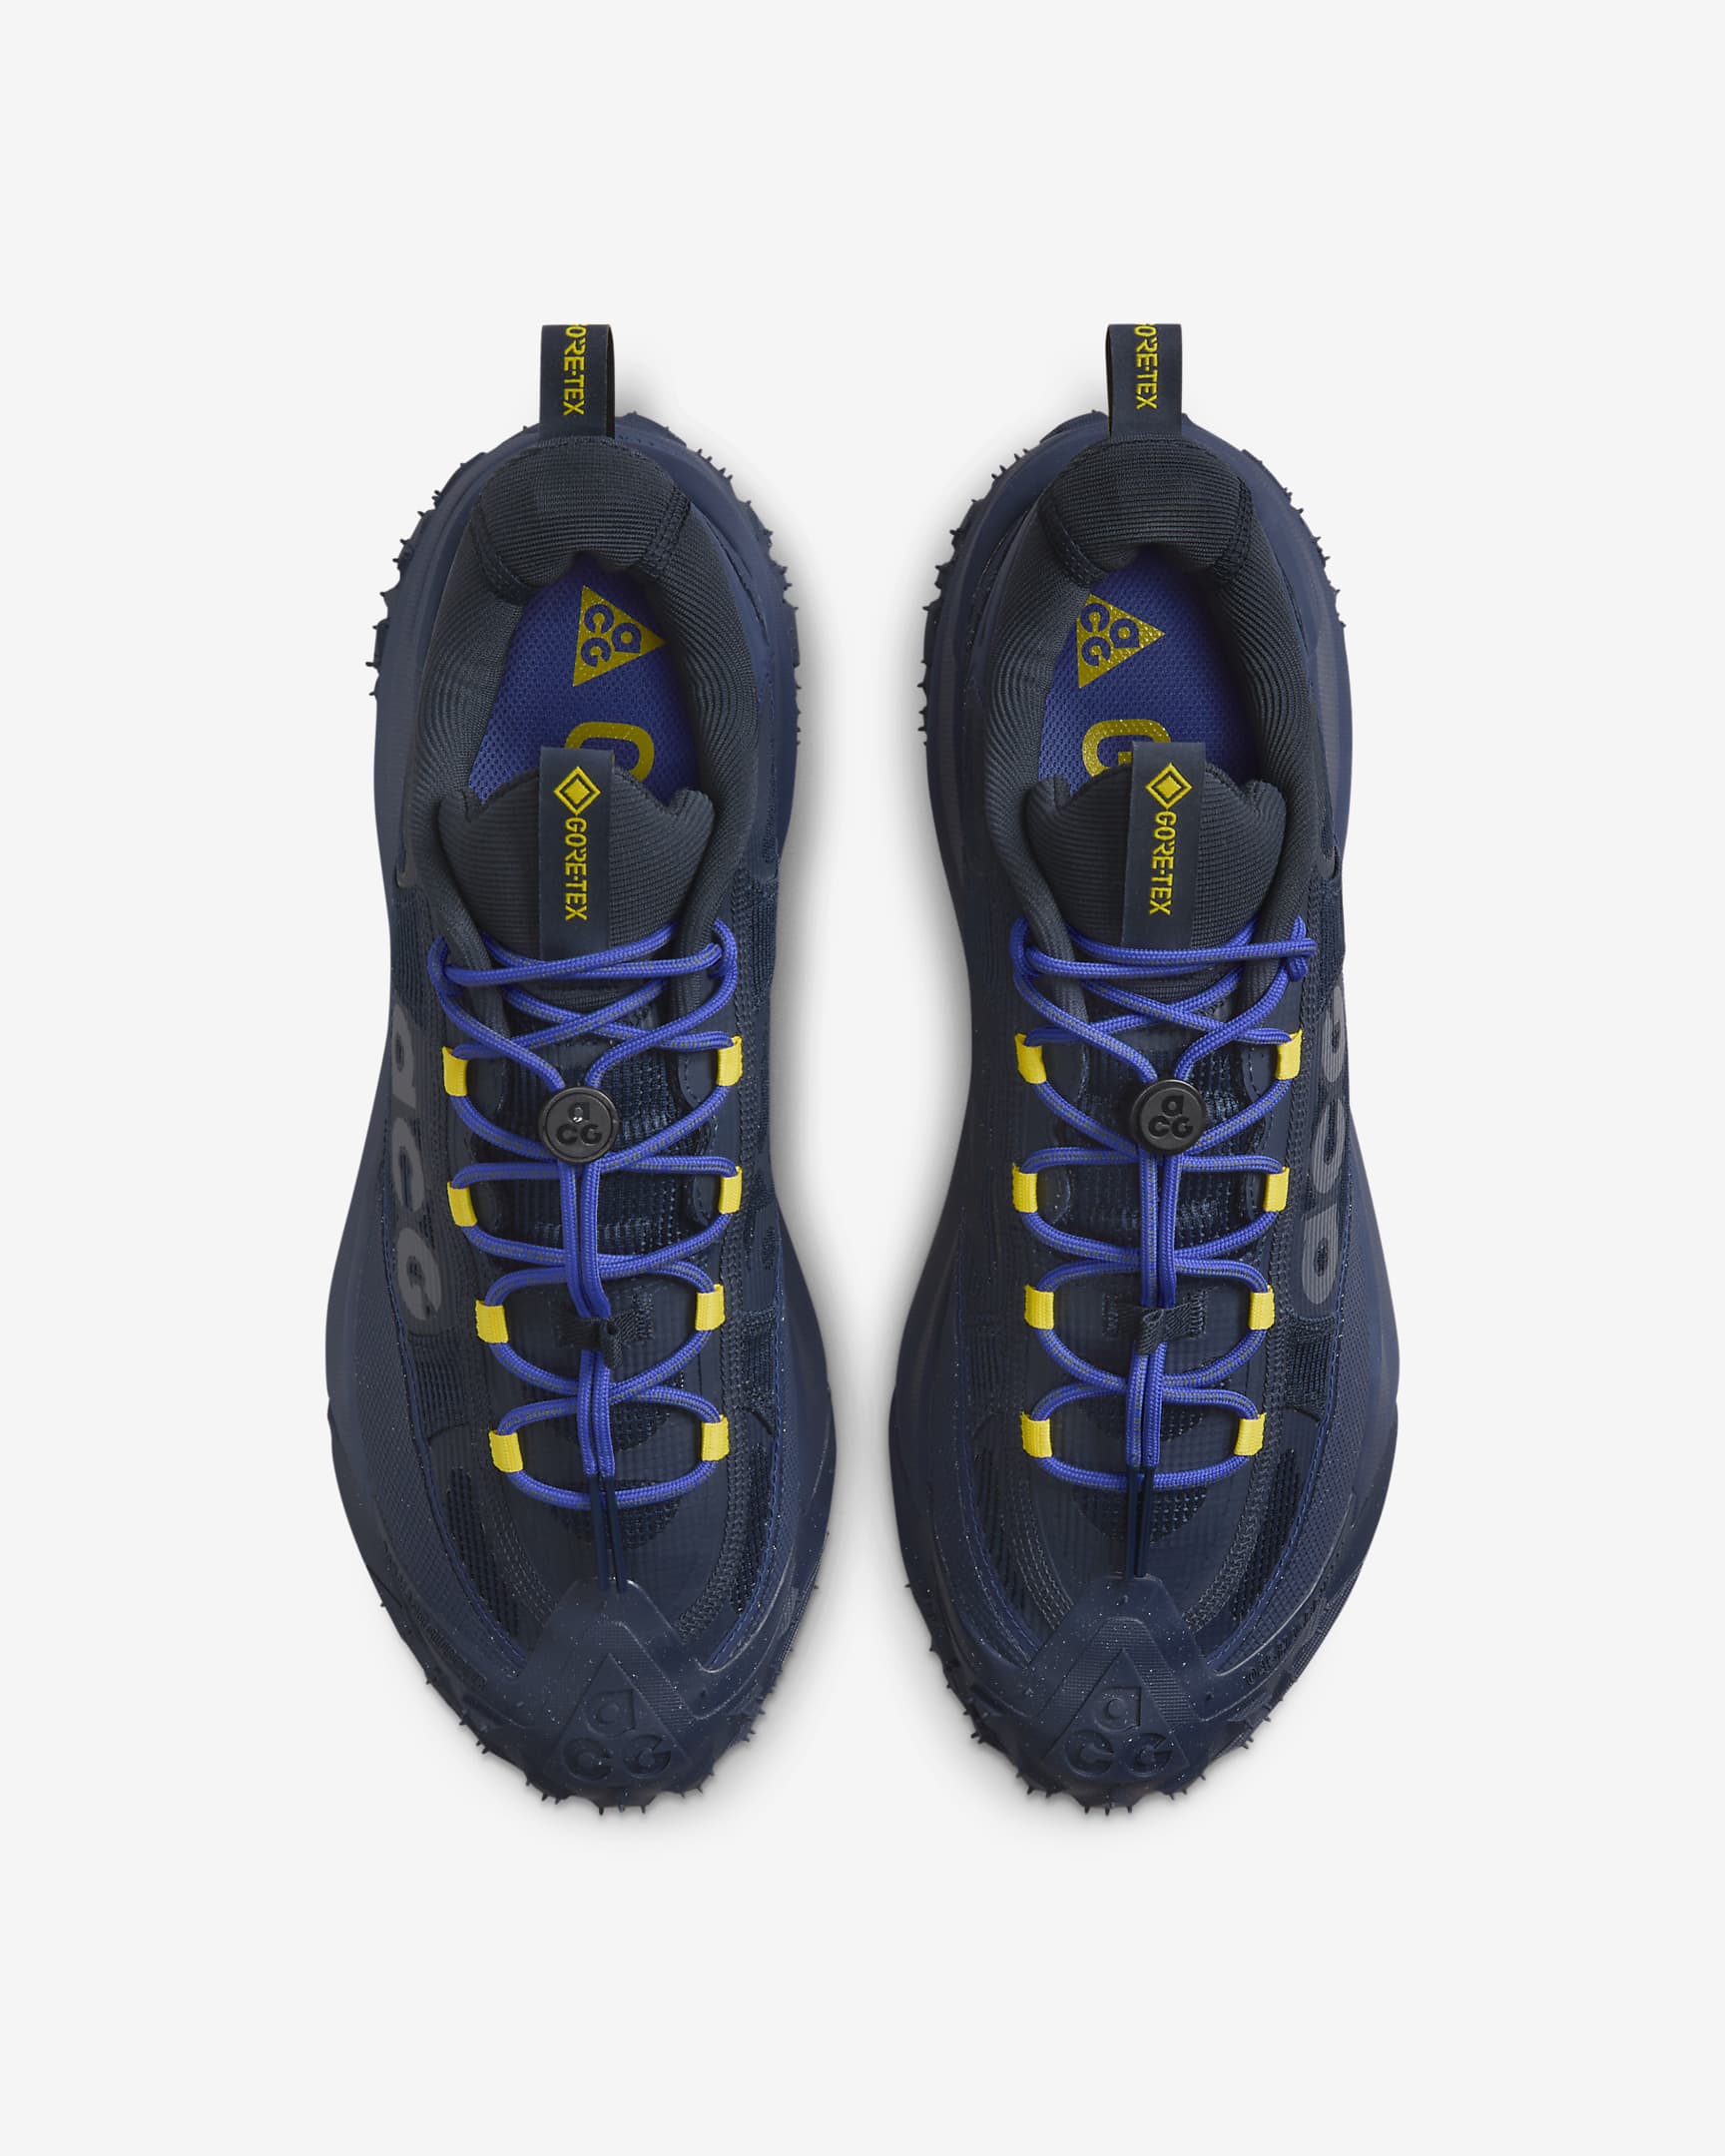 Nike ACG Mountain Fly 2 Low GORE-TEX Men's Shoes - Dark Obsidian/Midnight Navy/Persian Violet/Light Carbon